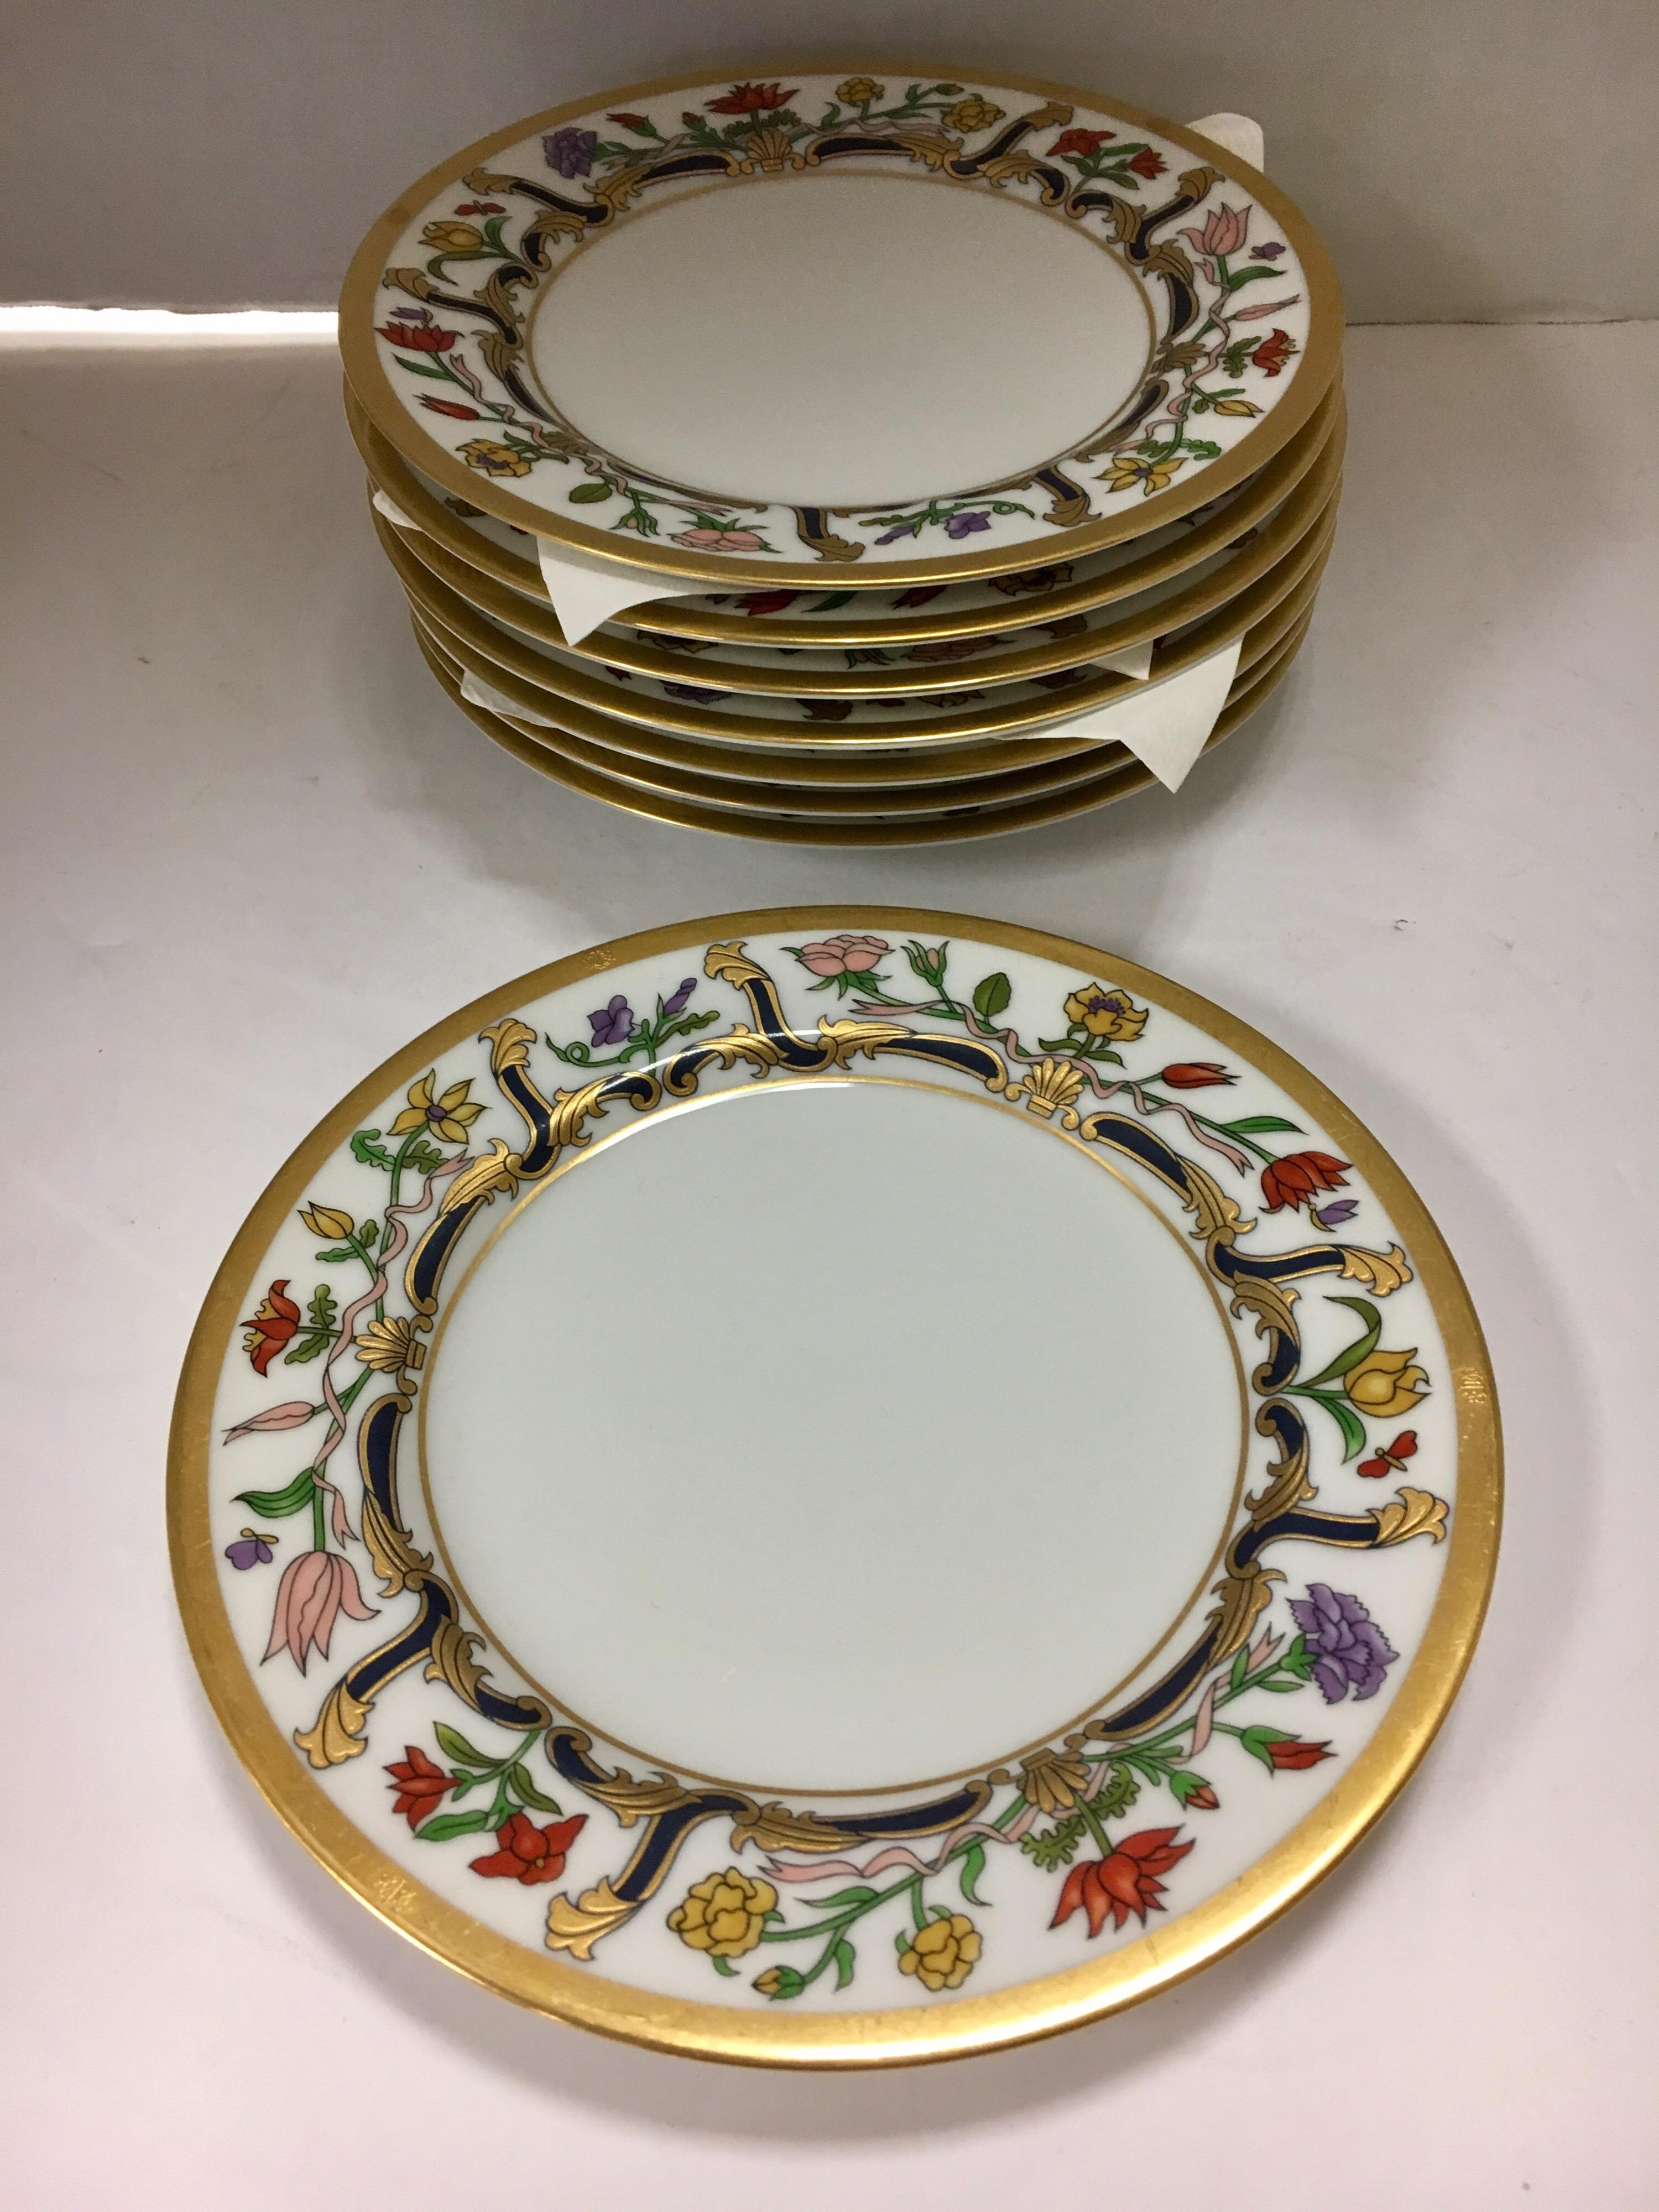 Rare, coveted and out of production Christian Dior fine porcelain china. The pattern is Renaissance and
it features the famed blue and gold scrolls and floral rim. The set was in production from 1990-1999 and then was discontinued, making this